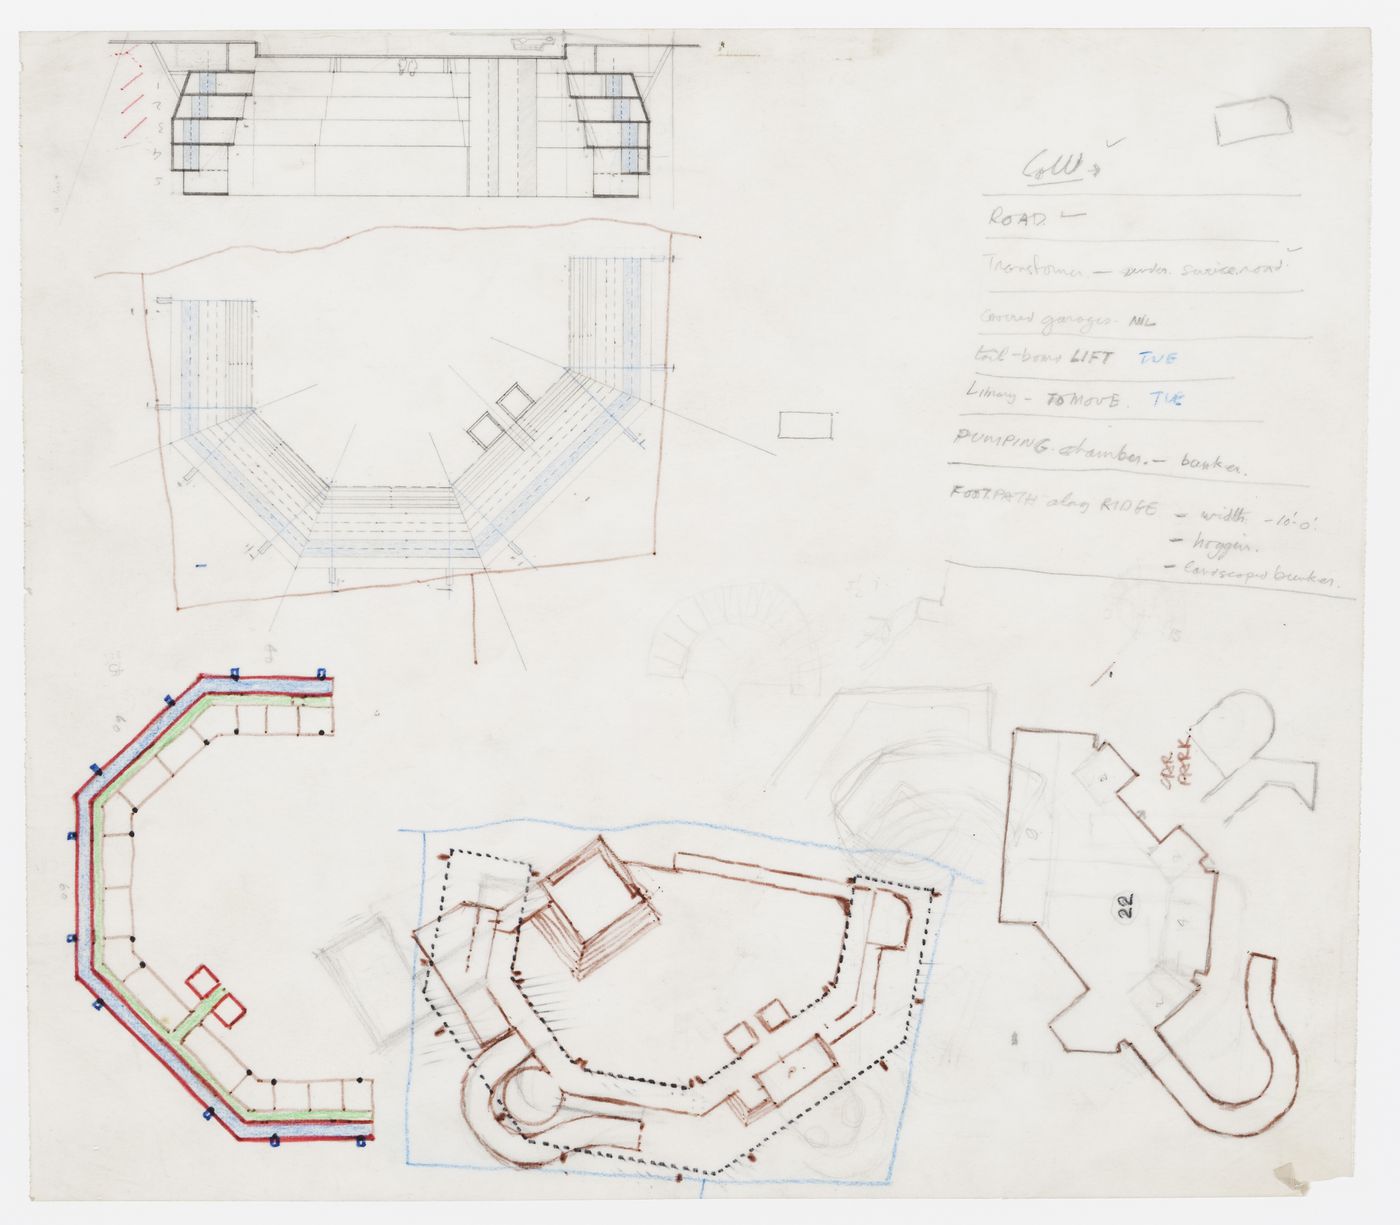 Florey Building, Queen's College, University of Oxford, Oxford, England: sketch plans and section with notes